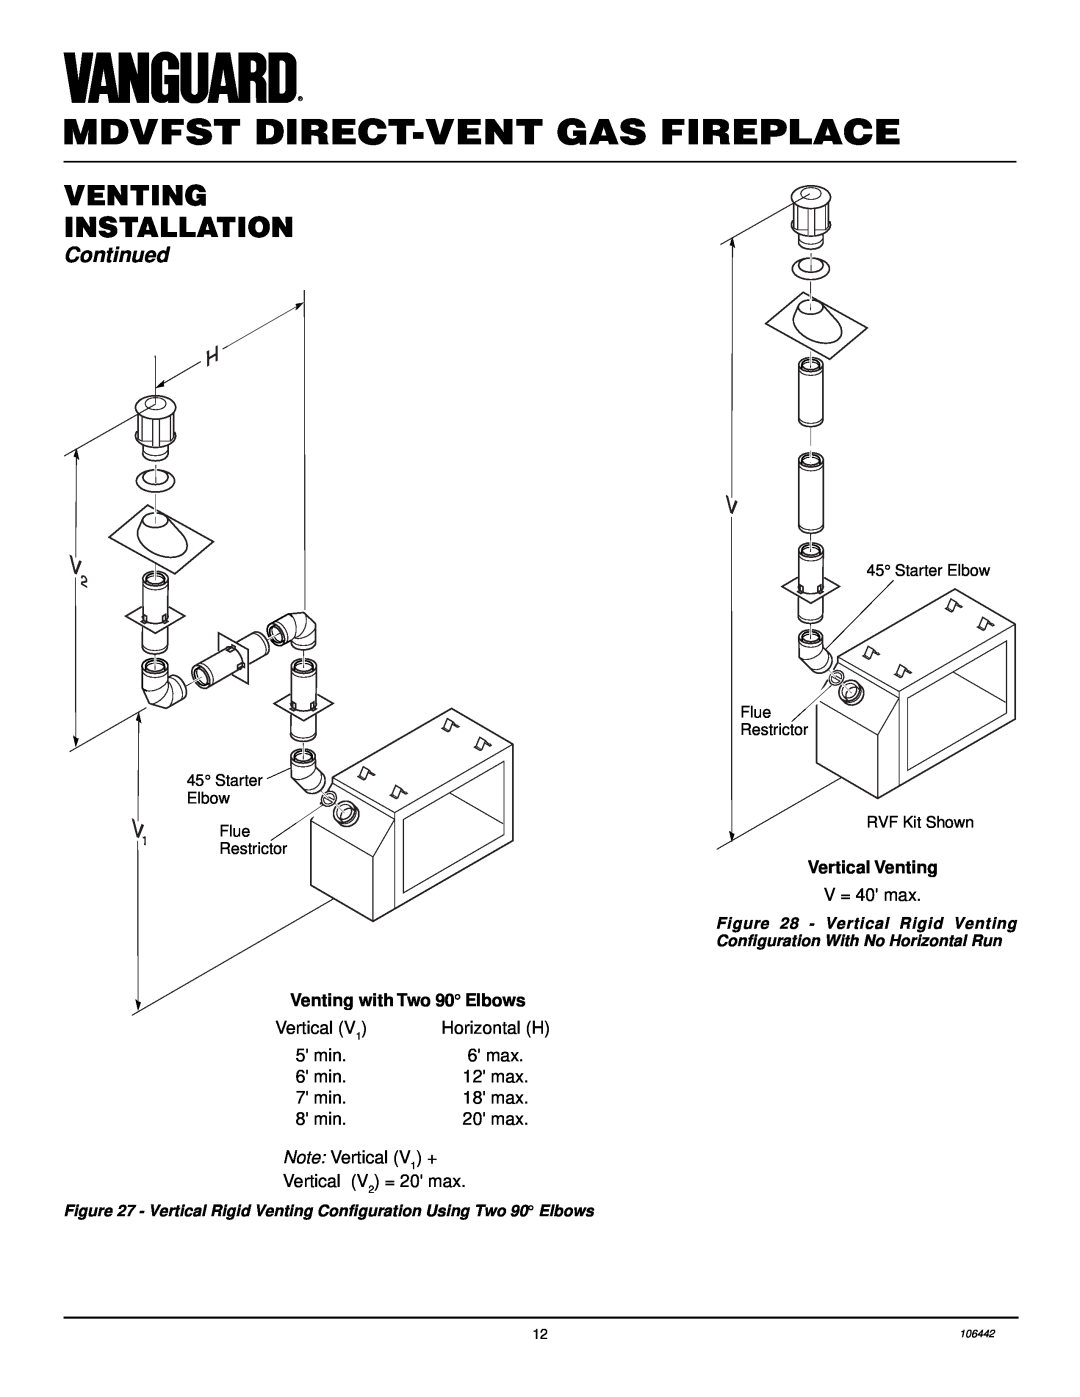 Desa MDVFST Vertical Venting, Mdvfst Direct-Ventgas Fireplace, Venting Installation, Continued, Venting with Two 90 Elbows 